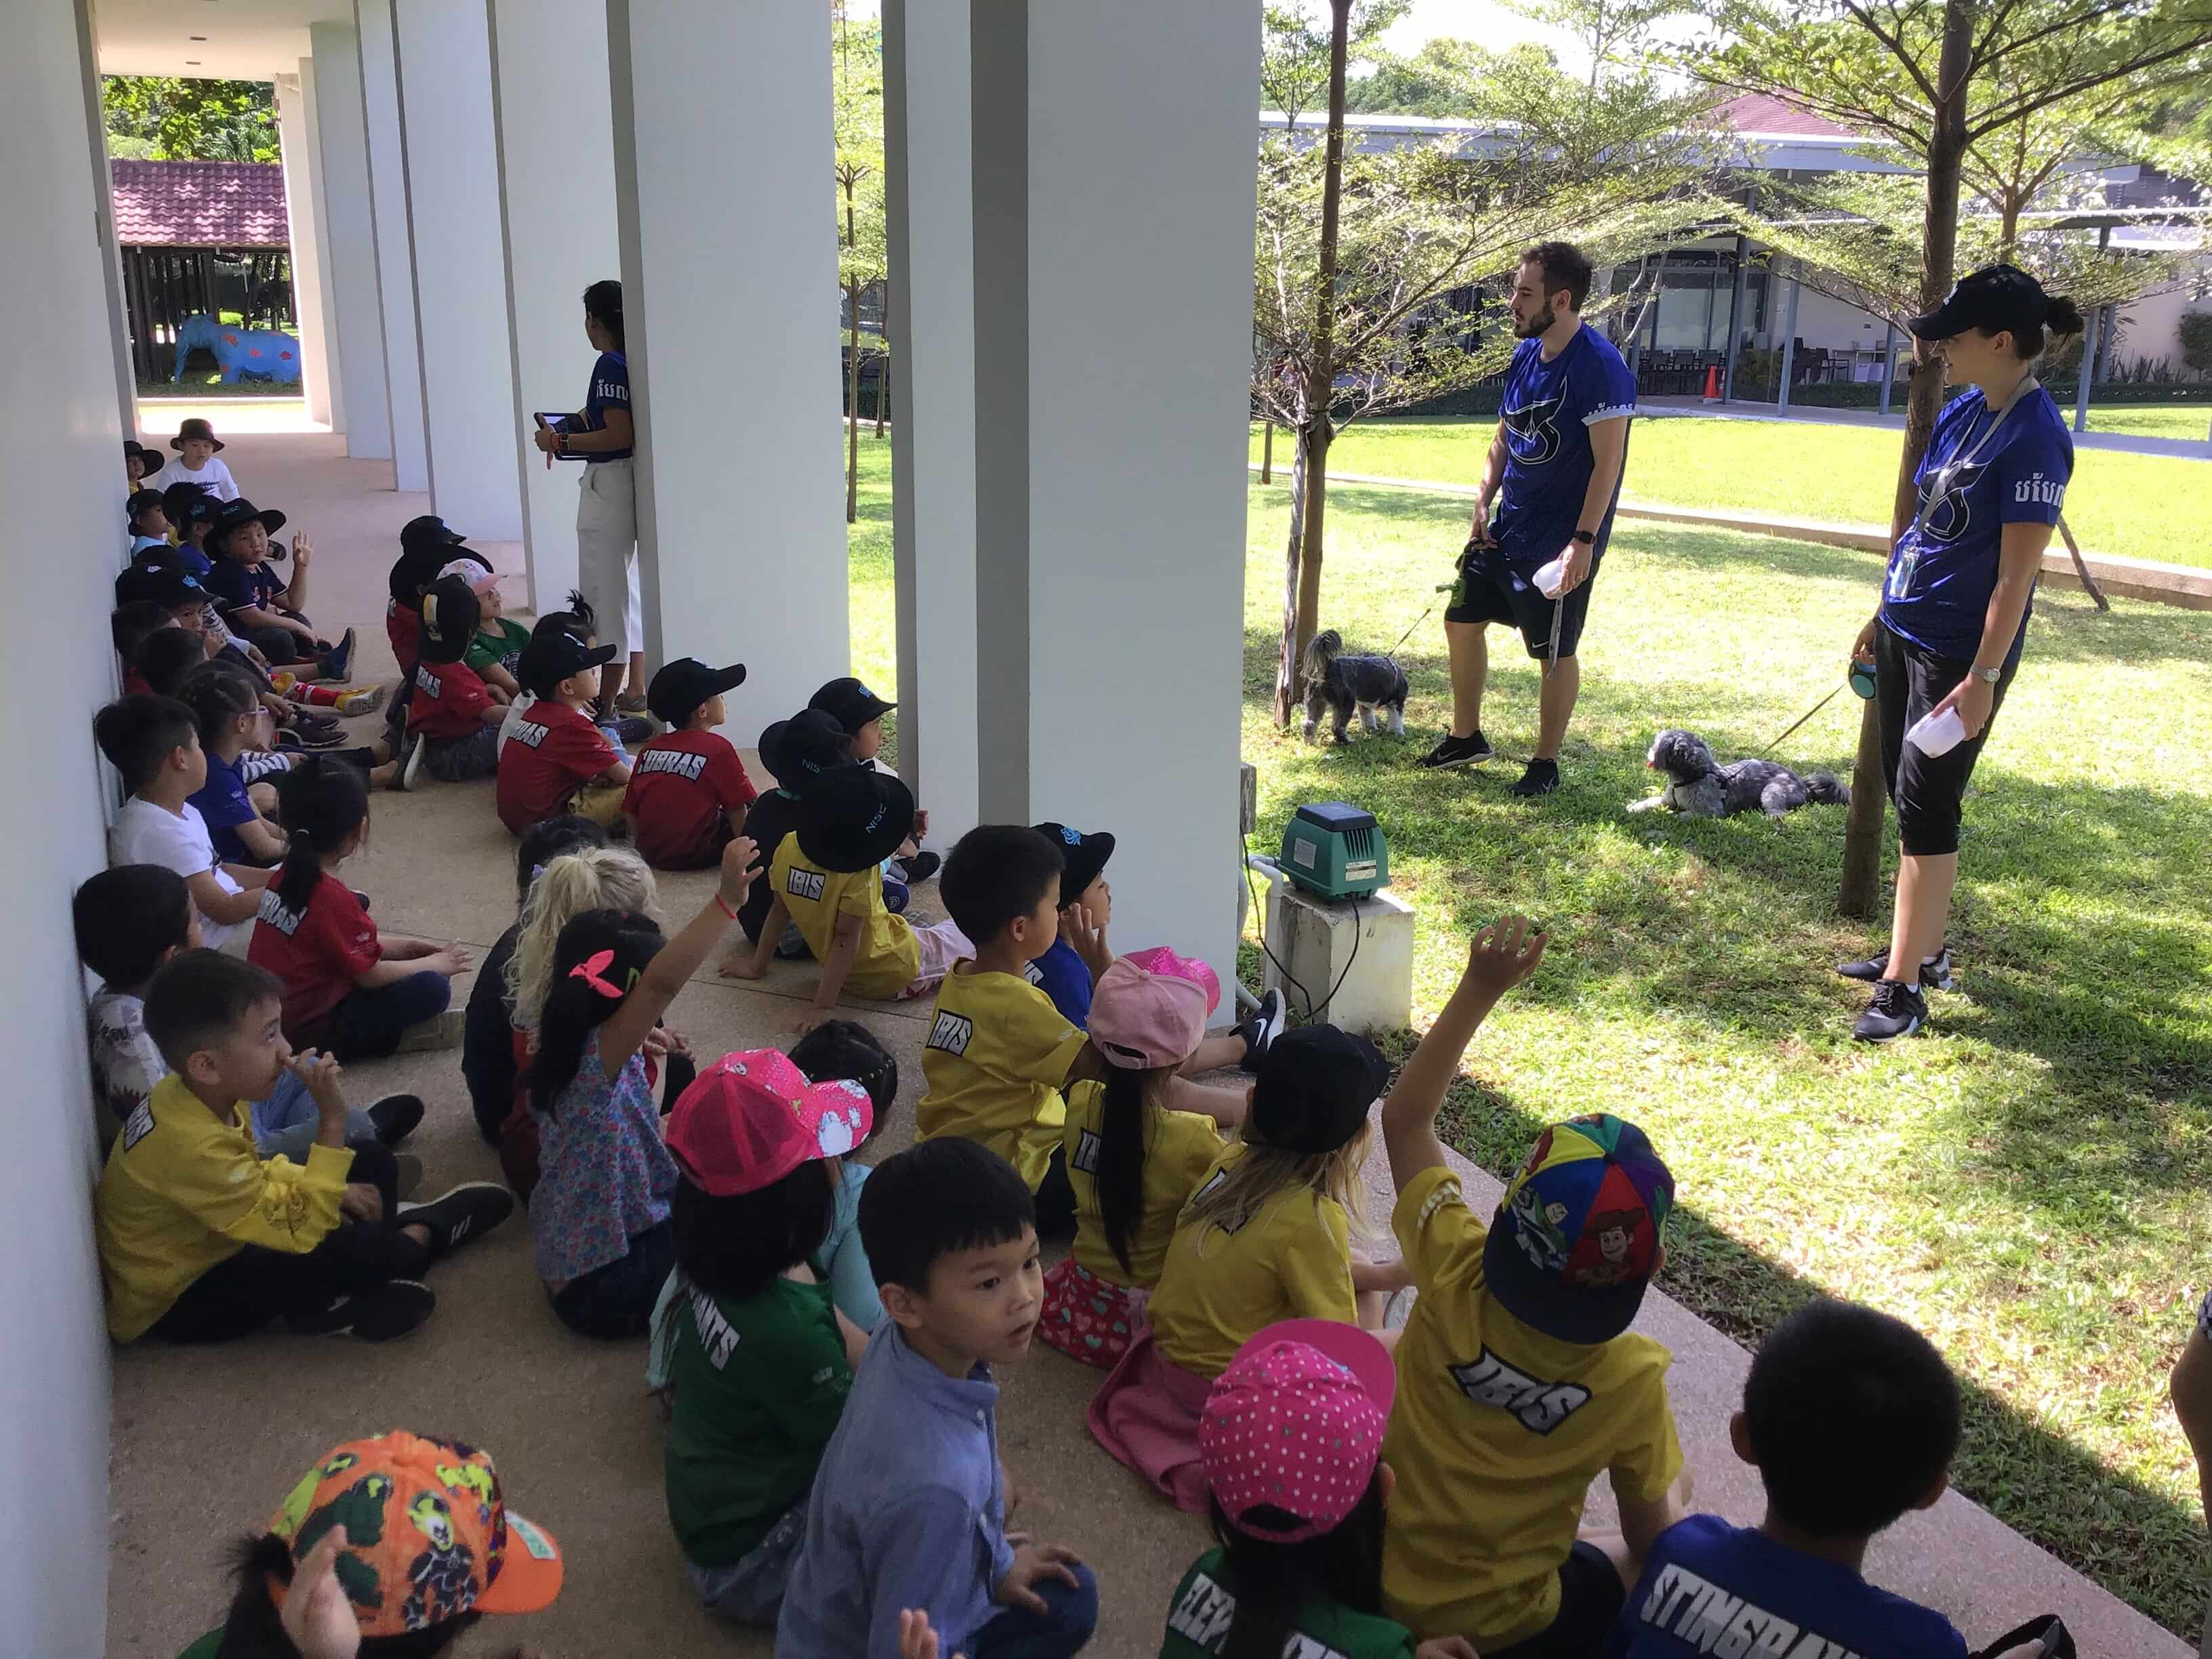 Taking a look back on this semester’s exciting Primary school learning trips at Northbridge-taking-a-look-back-on-this-semesters-exciting-primary-school-learning-trips-at-northbridge-1783E87B919E47AFB103DCFC60DA05D3 2